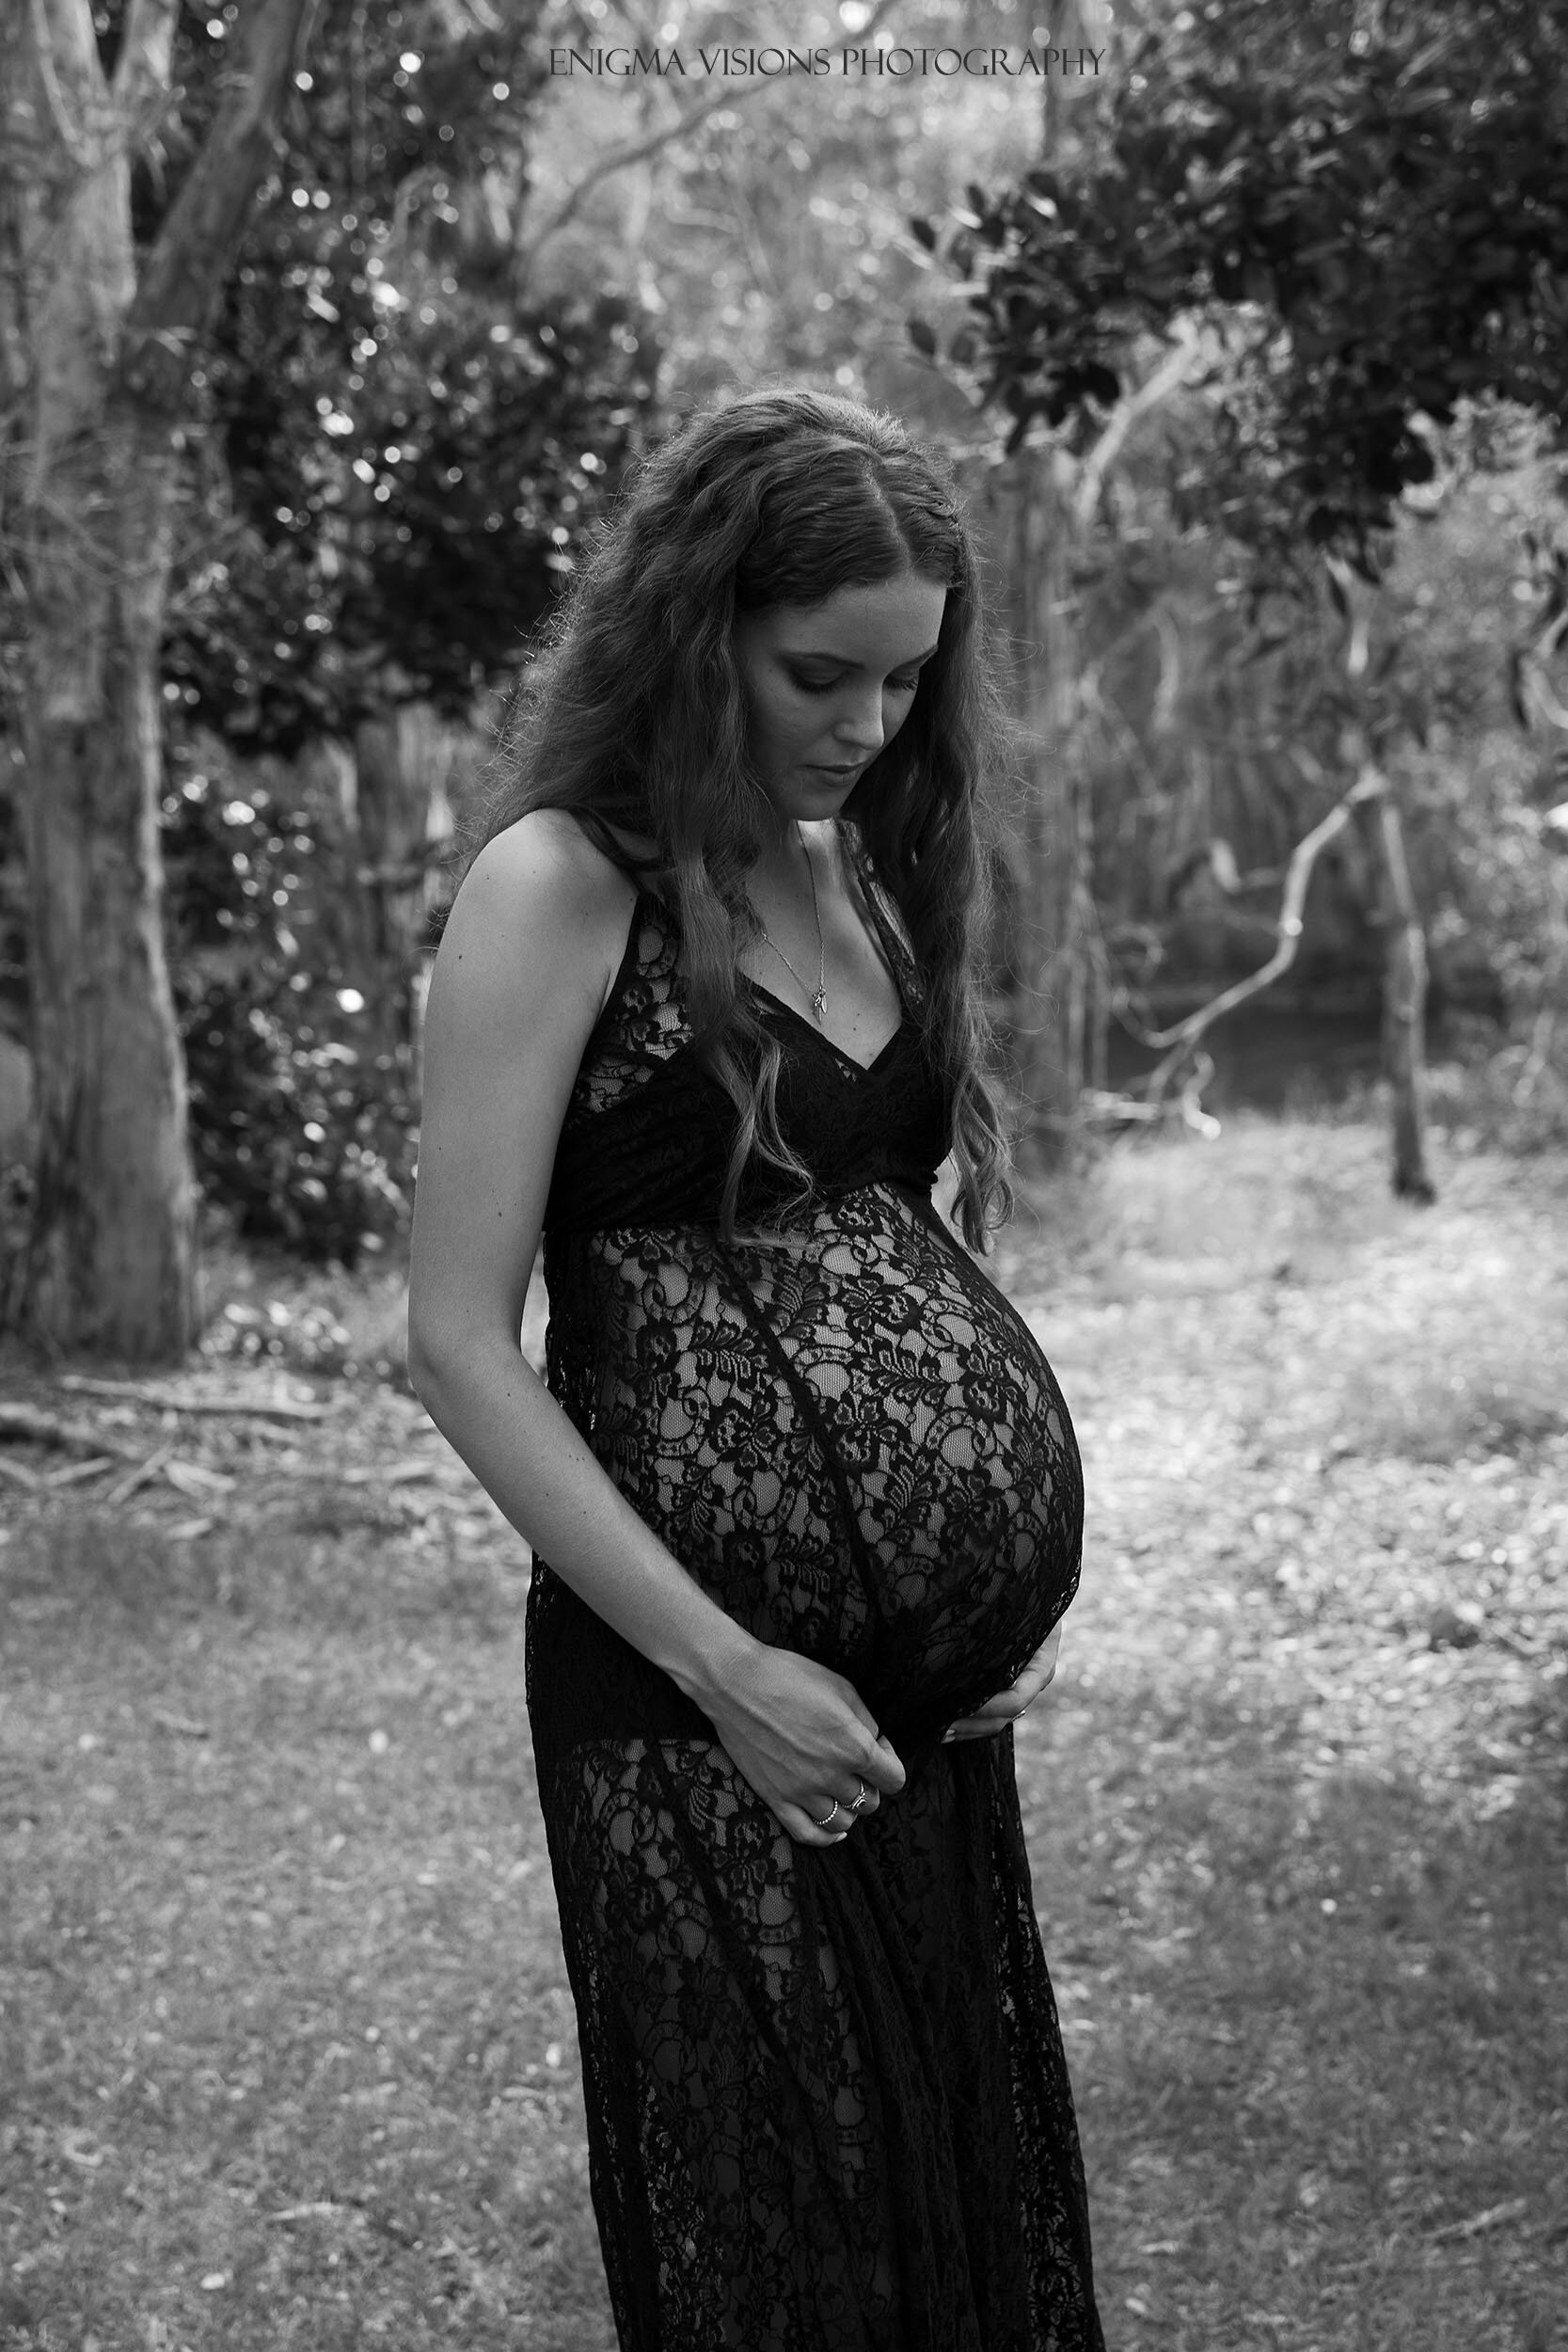 enigma-visions-photography-maternity-mahlea (1).jpg